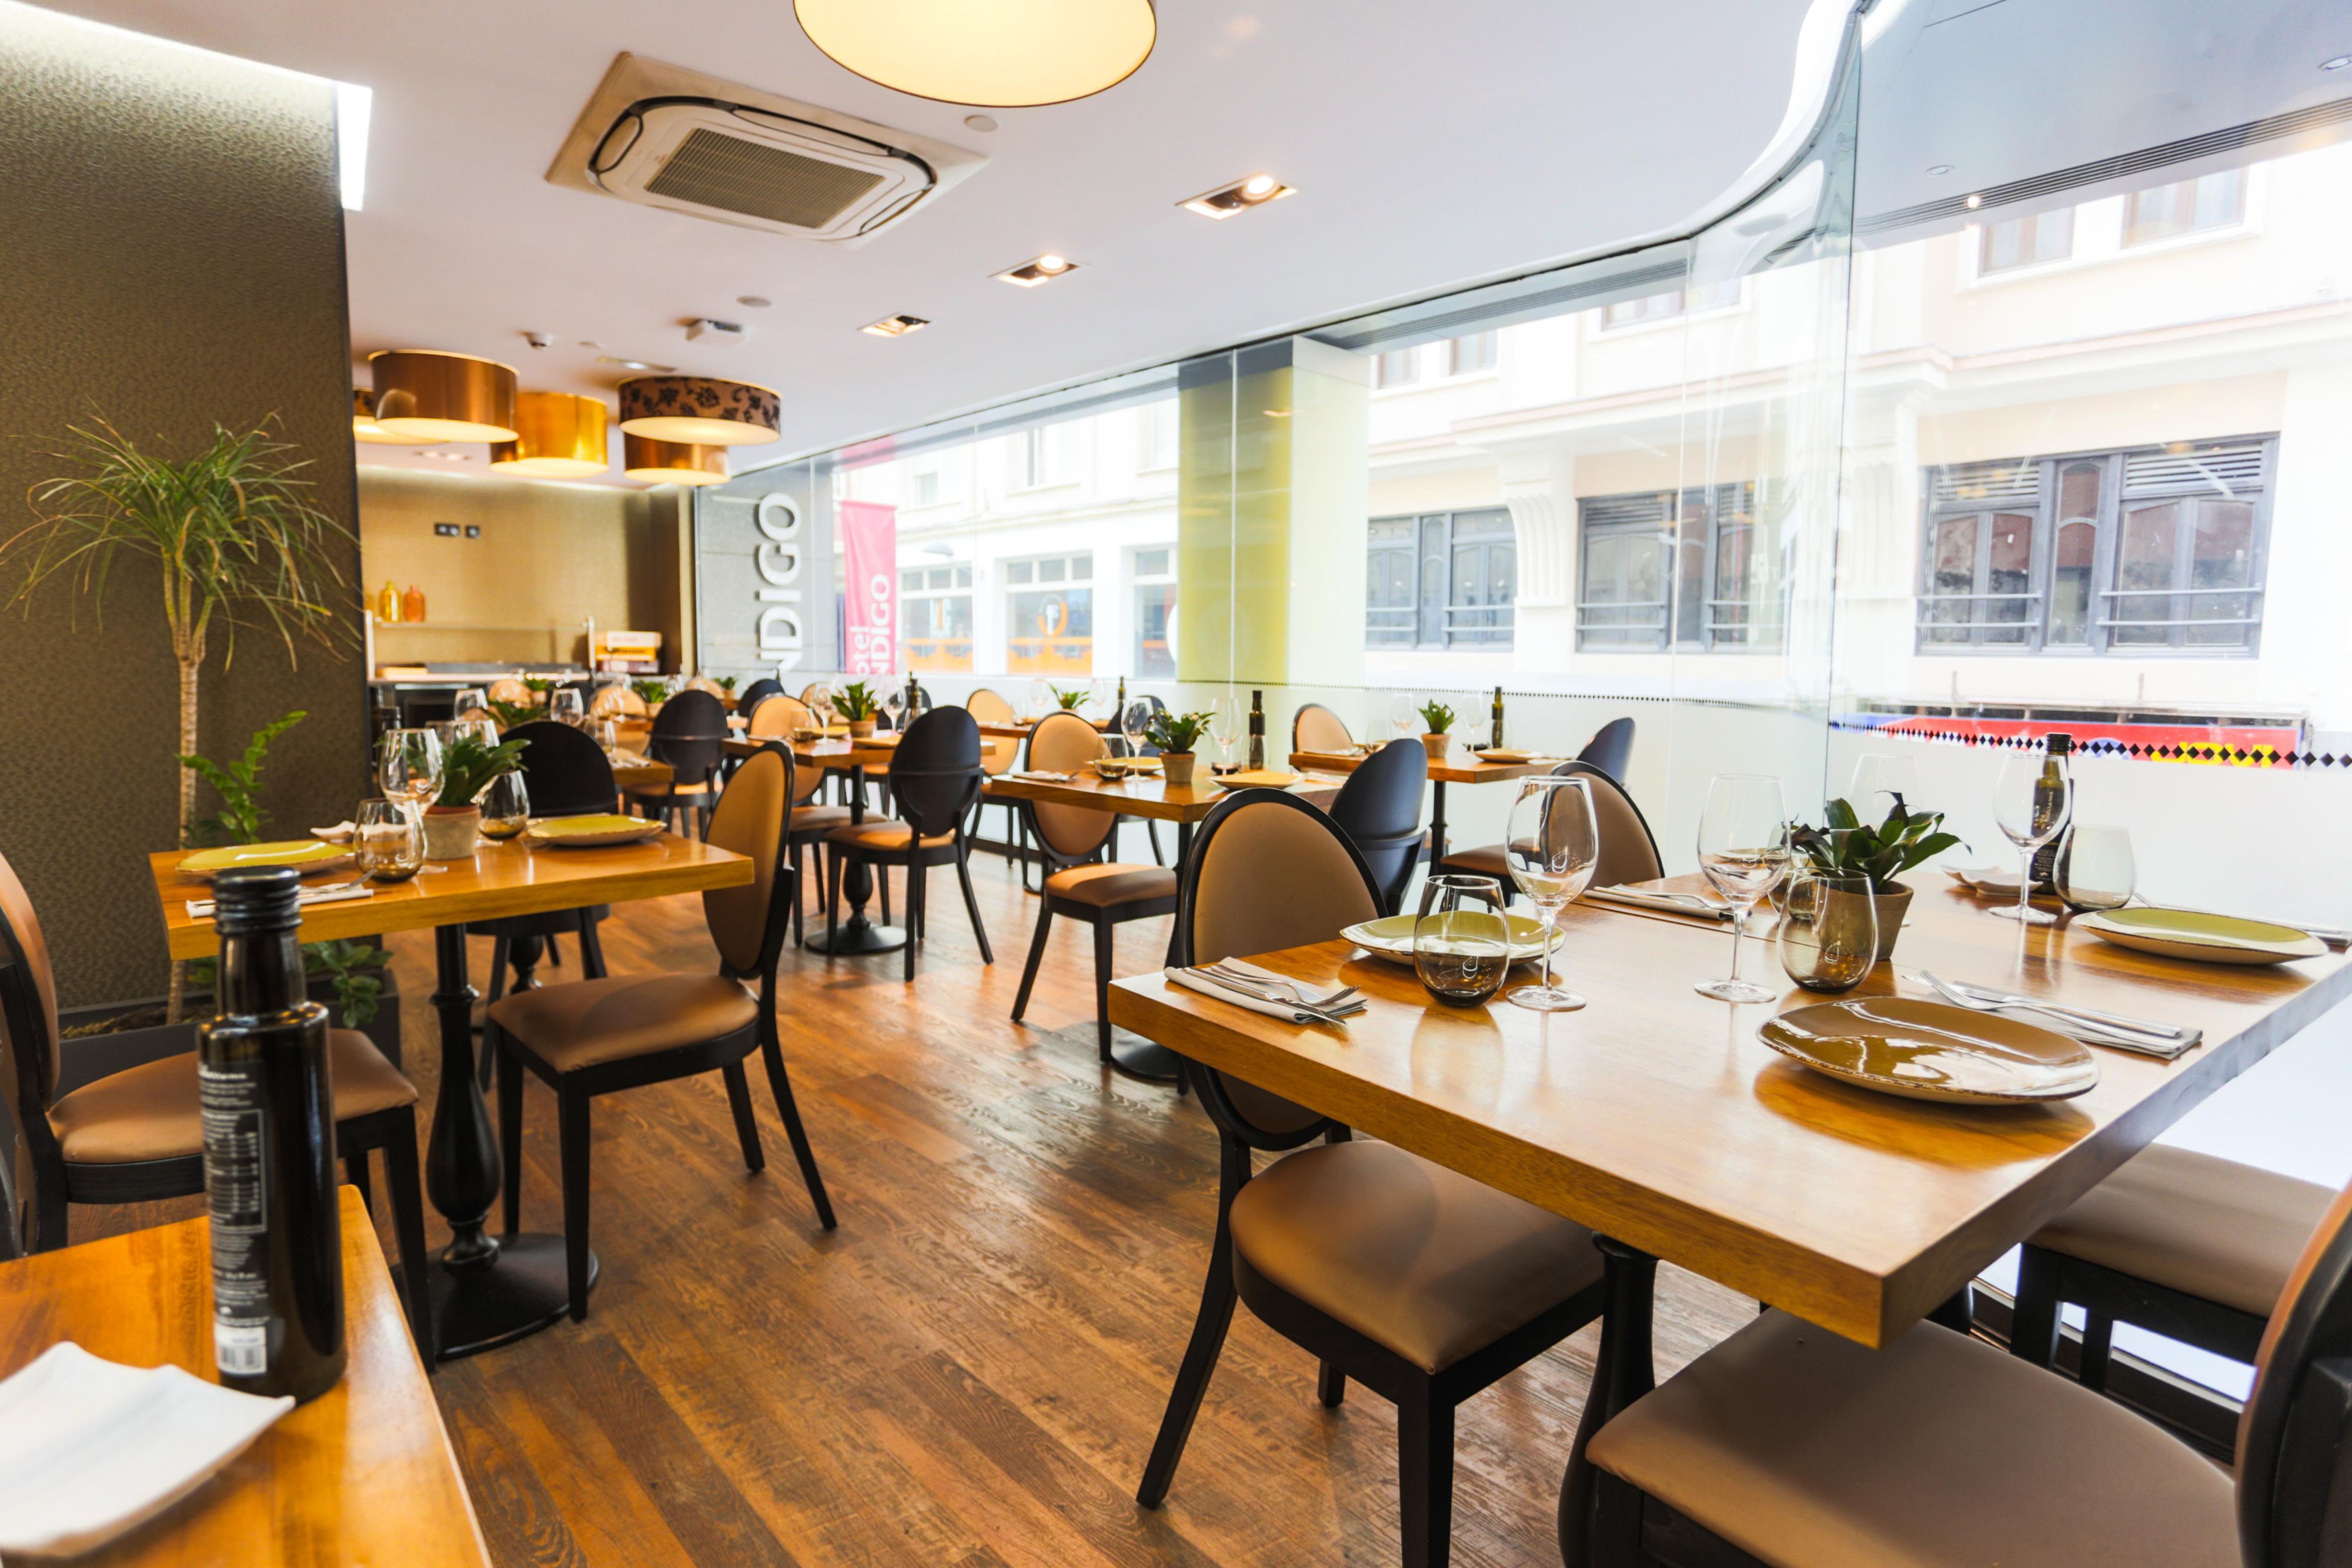 If you're looking for restaurants near Gran Vía in Madrid, you've come to the perfect place. El Telón offers you a gastronomic experience based on exceptionally high-quality ingredients, carefully crafted so that each dish surprises you with its delicious flavors and aromas.